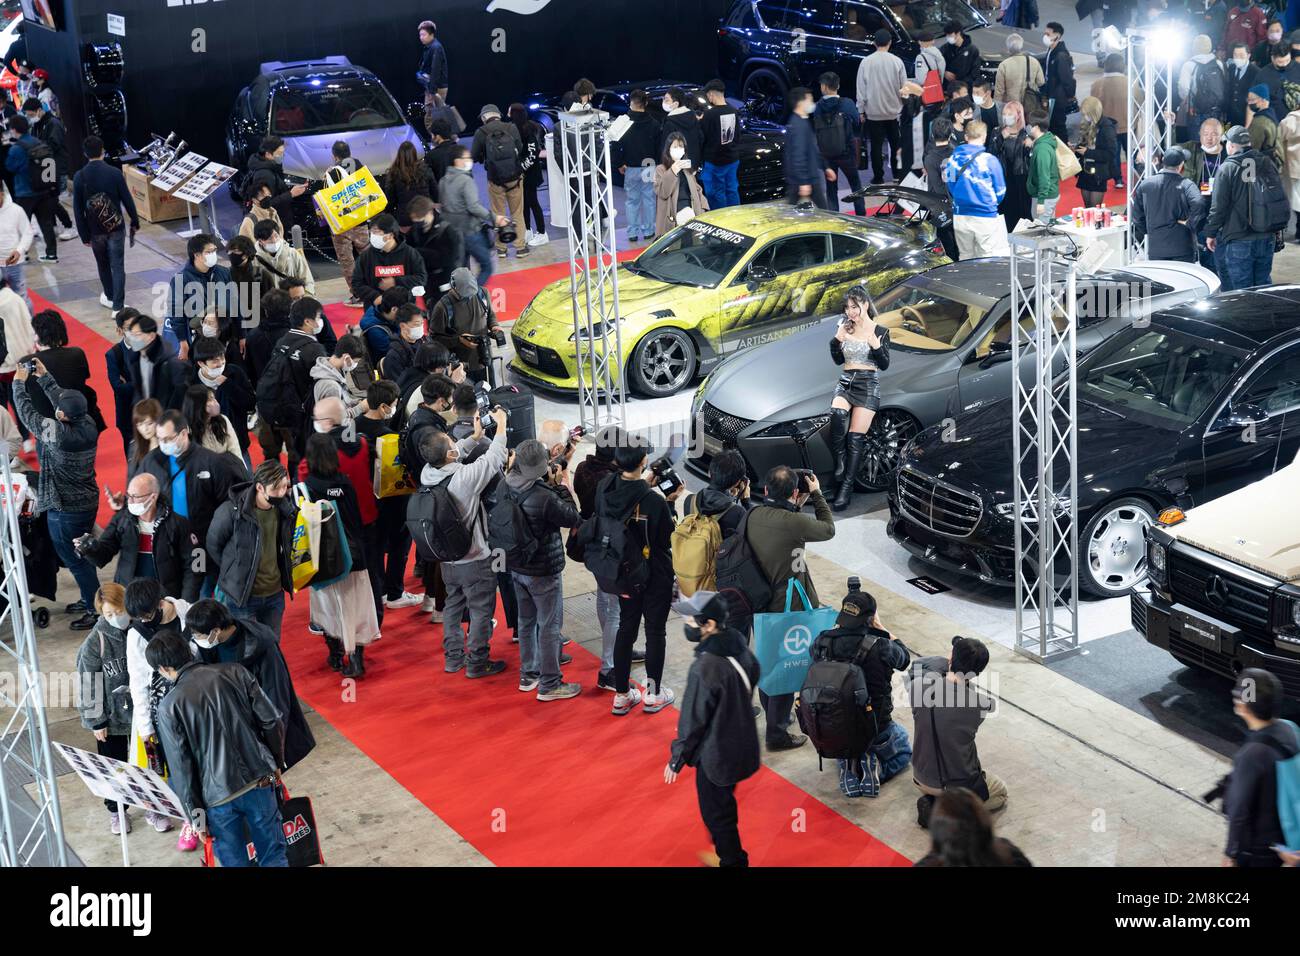 Chiba, Chiba Prefecture, Japan. 13th Jan, 2023. Crowds of visitors and spectators enjoy the Tokyo Auto Salon.Tokyo Auto Salon (æ±äº¬ã‚ªãƒ¼ãƒˆã‚µãƒ-ãƒ³) is considered one of the most prestigious aftermarket car shows in the world, attracting car enthusiasts, manufacturers, and media from all over the globe. The show features a wide range of customized and high-performance cars, including sports cars, luxury cars, and even trucks and buses. Visitors can also expect to see car-related products and technology such as wheels, tires, audio systems, and car electronics. Some of the most notable Stock Photo